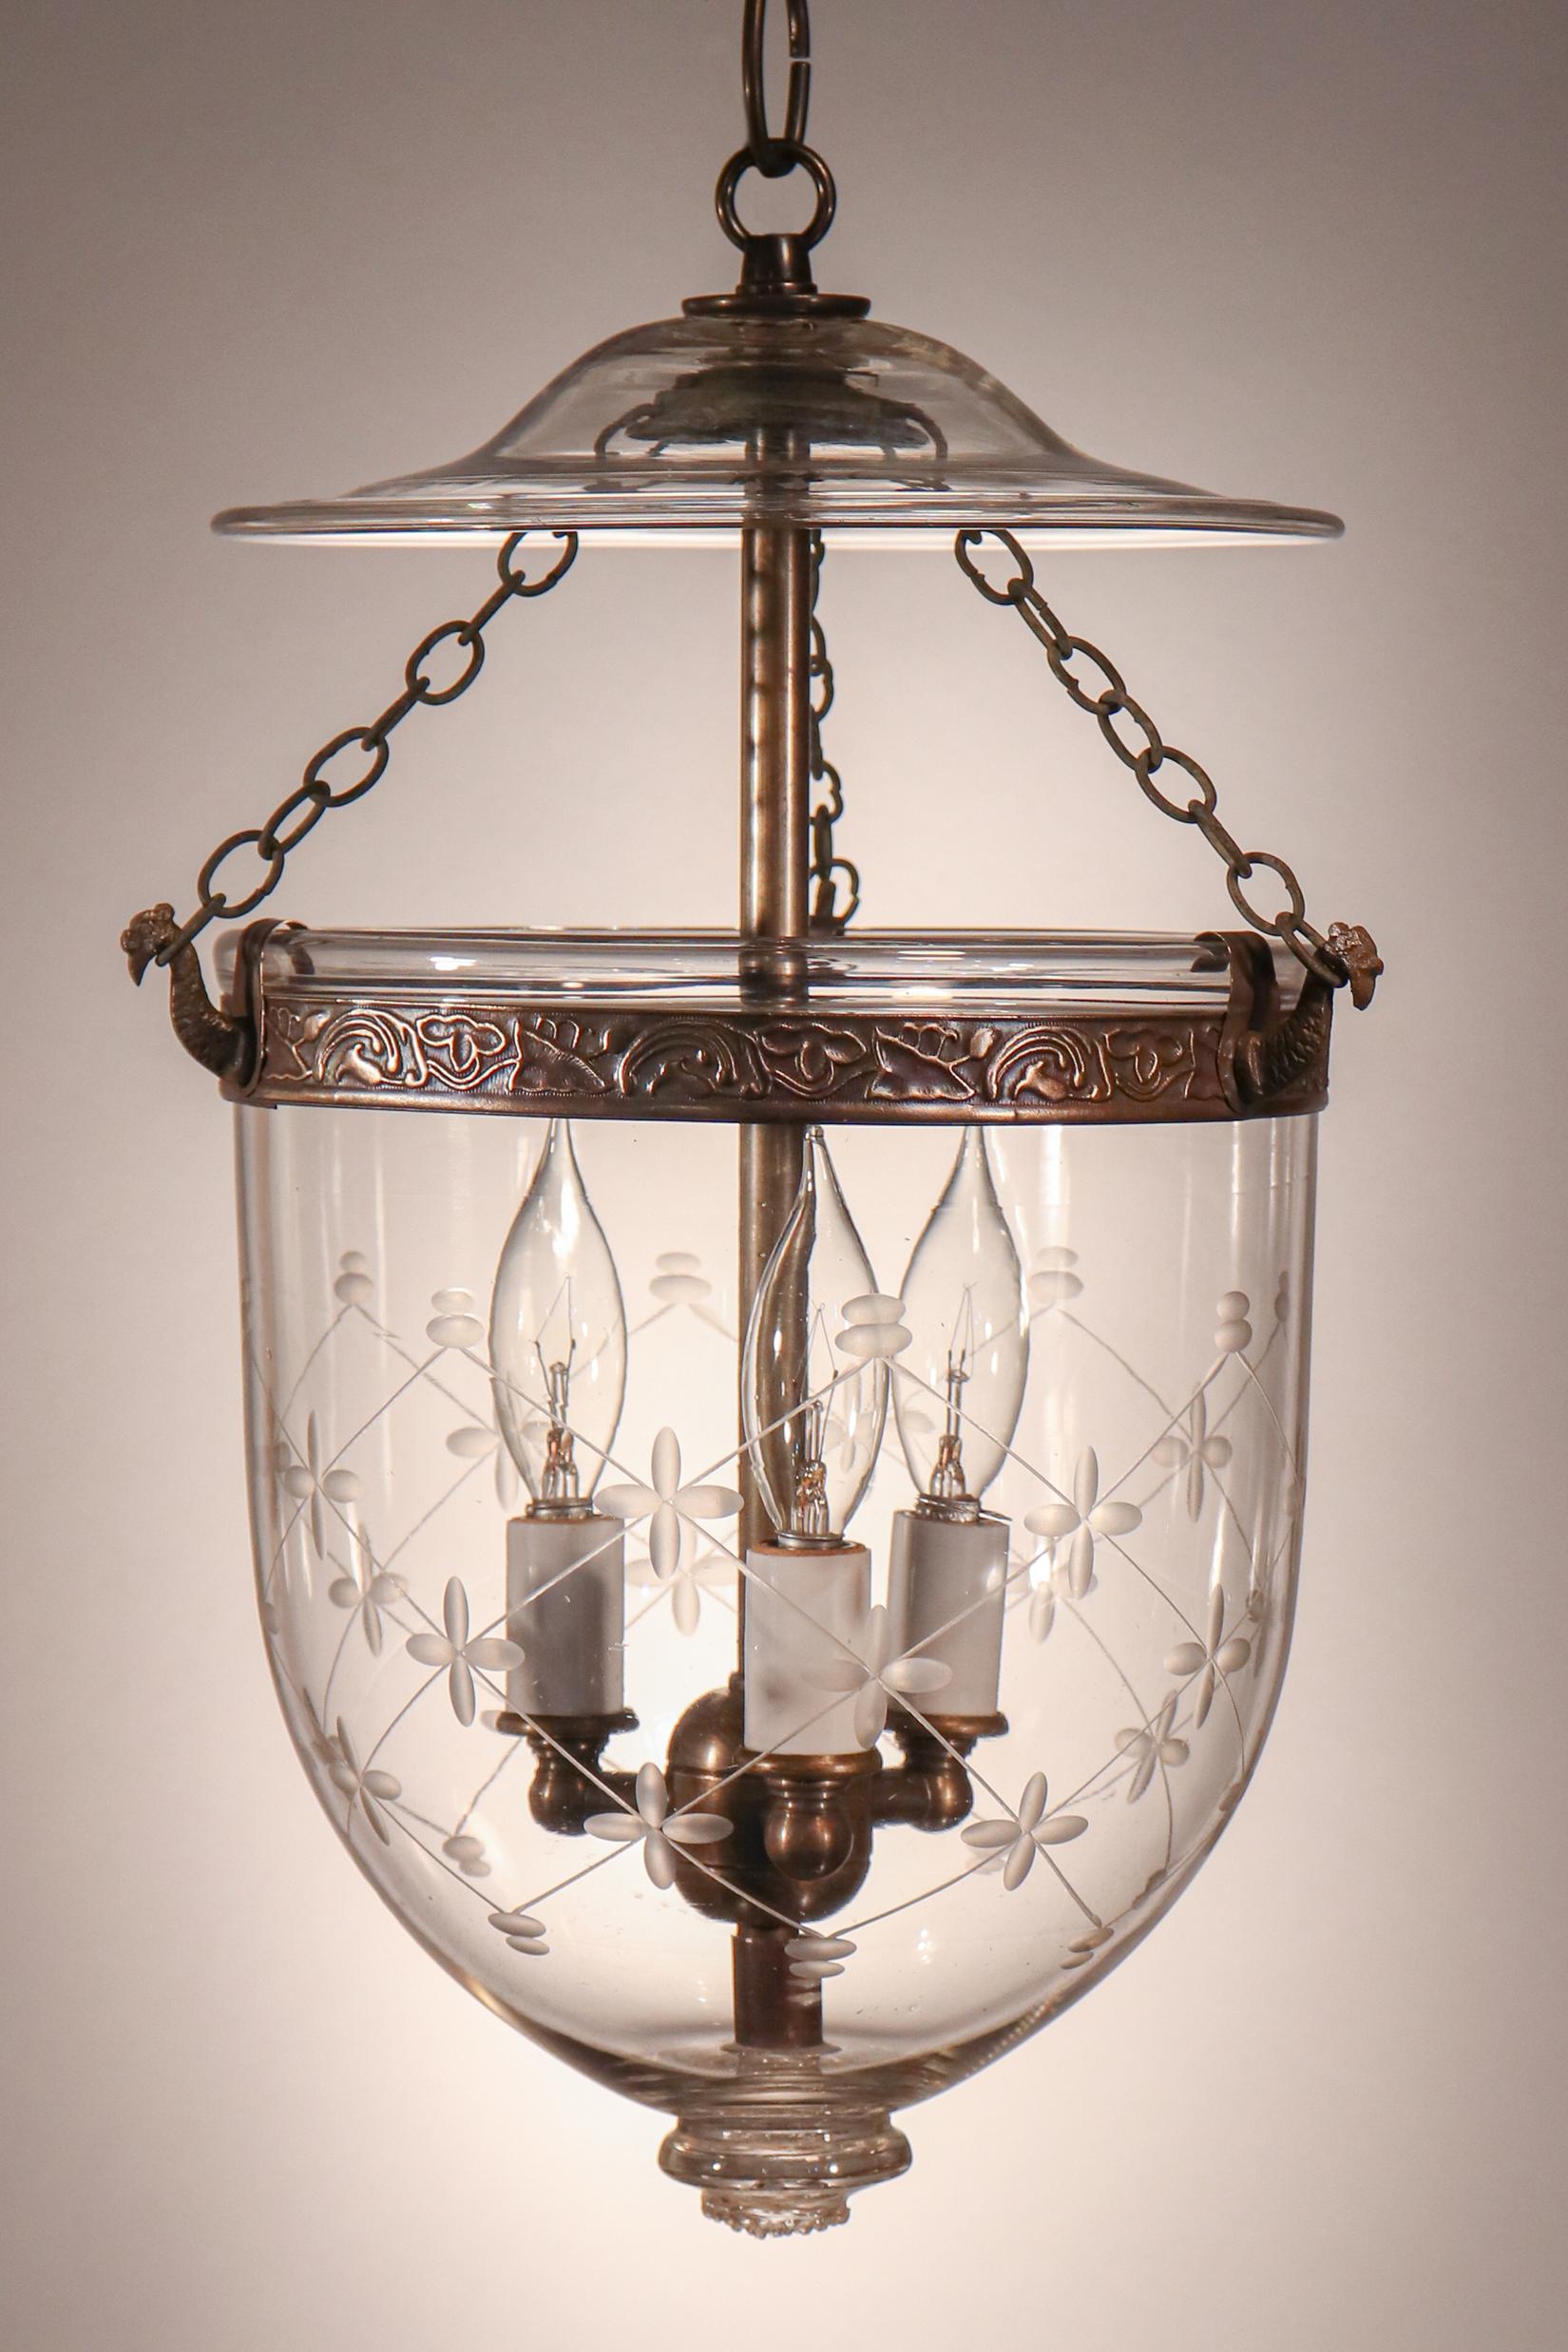 A truly lovely antique English bell jar lantern with fine quality hand blown glass and an etched trellis motif, circa 1890. Perfect for smaller spaces and/or lower ceiling heights, this lantern features its original smoke bell/lid and brass chains.